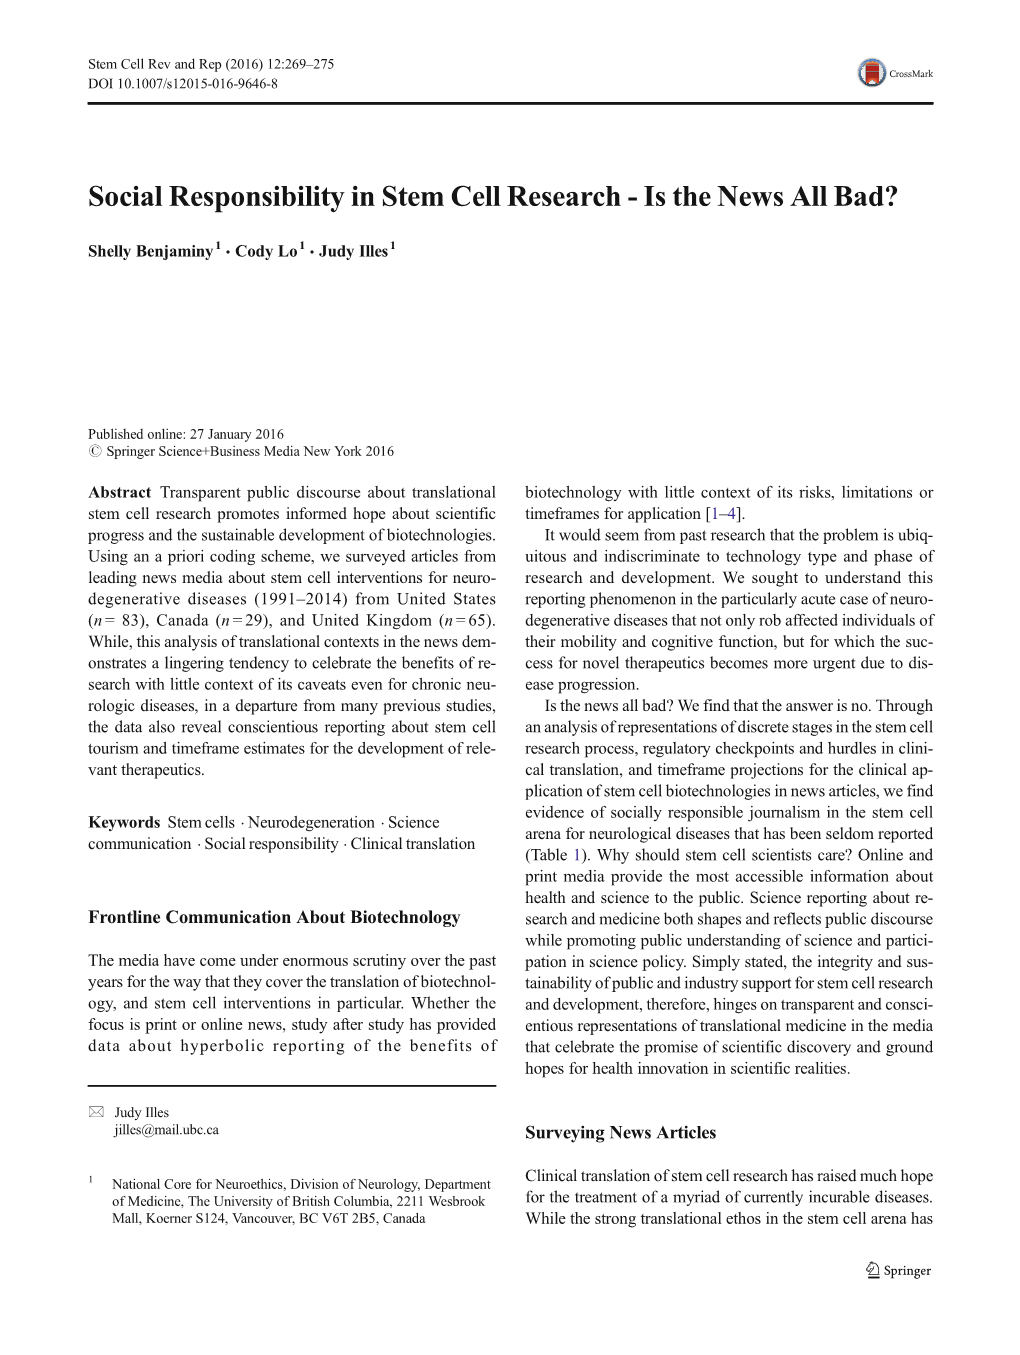 Social Responsibility in Stem Cell Research - Is the News All Bad?